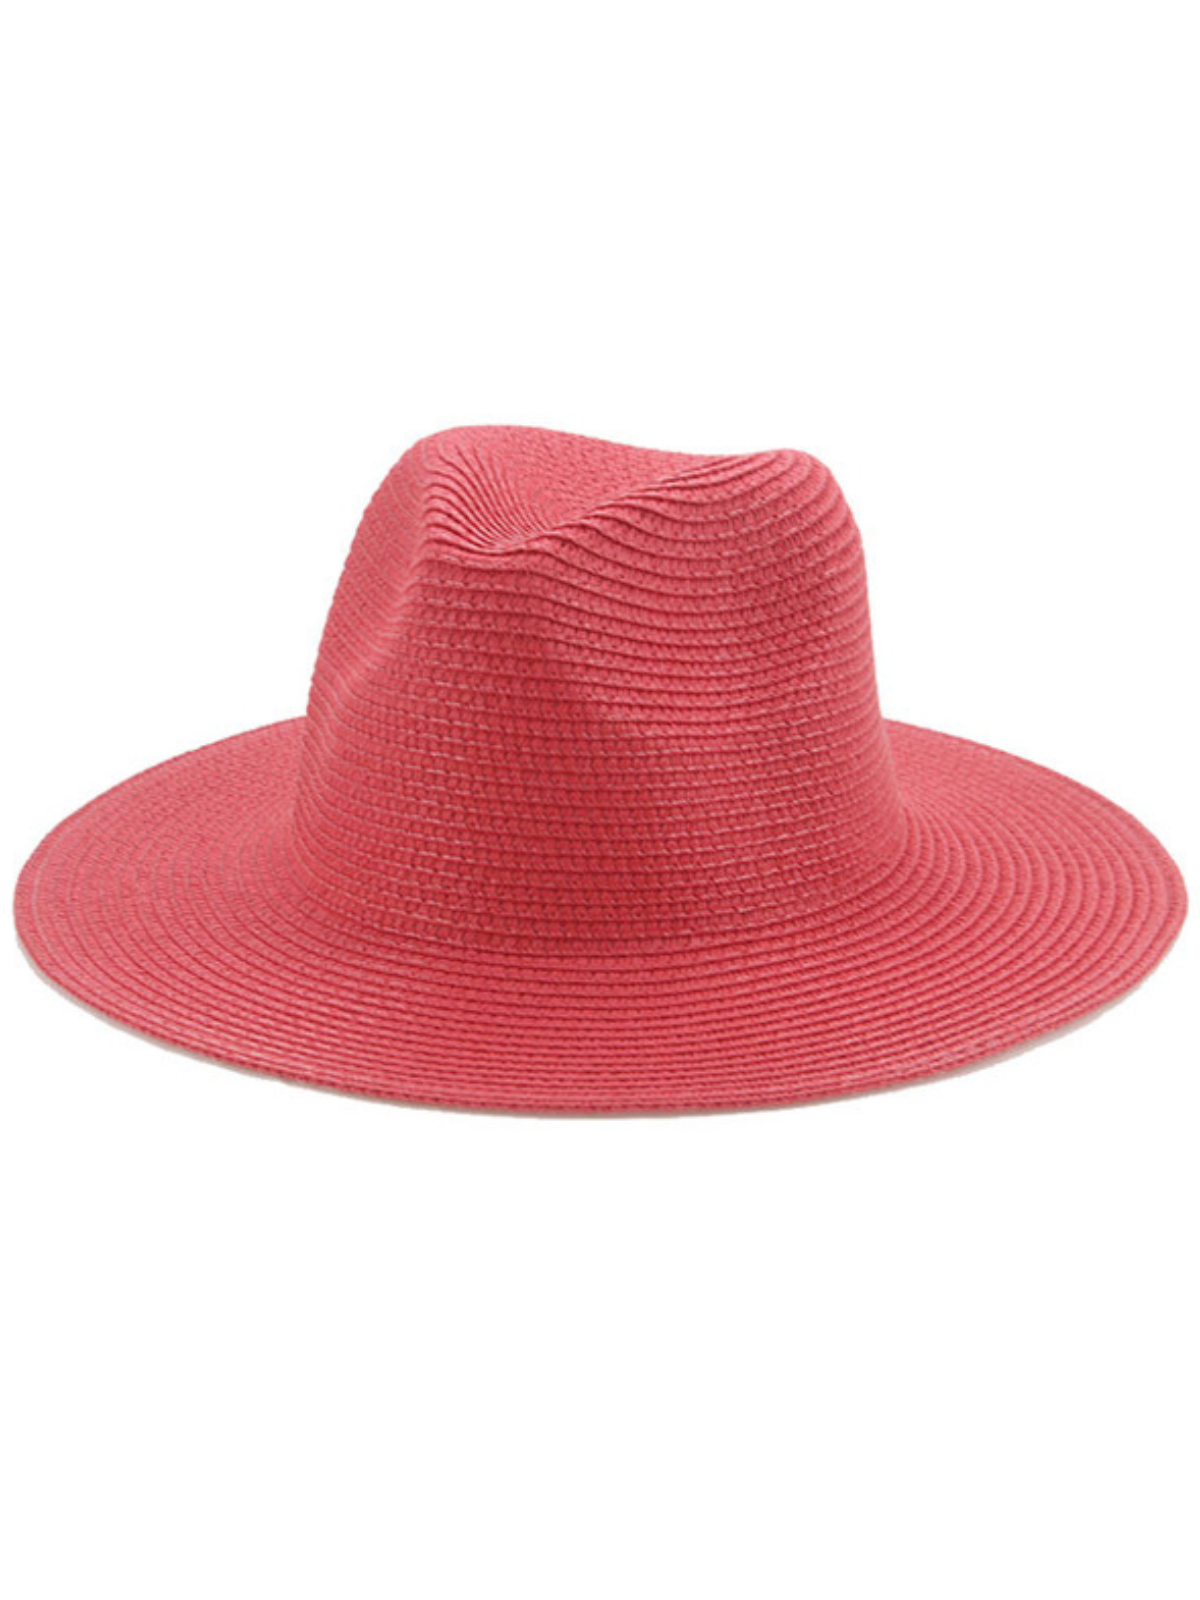 Not Your Basic Red Sun Hat